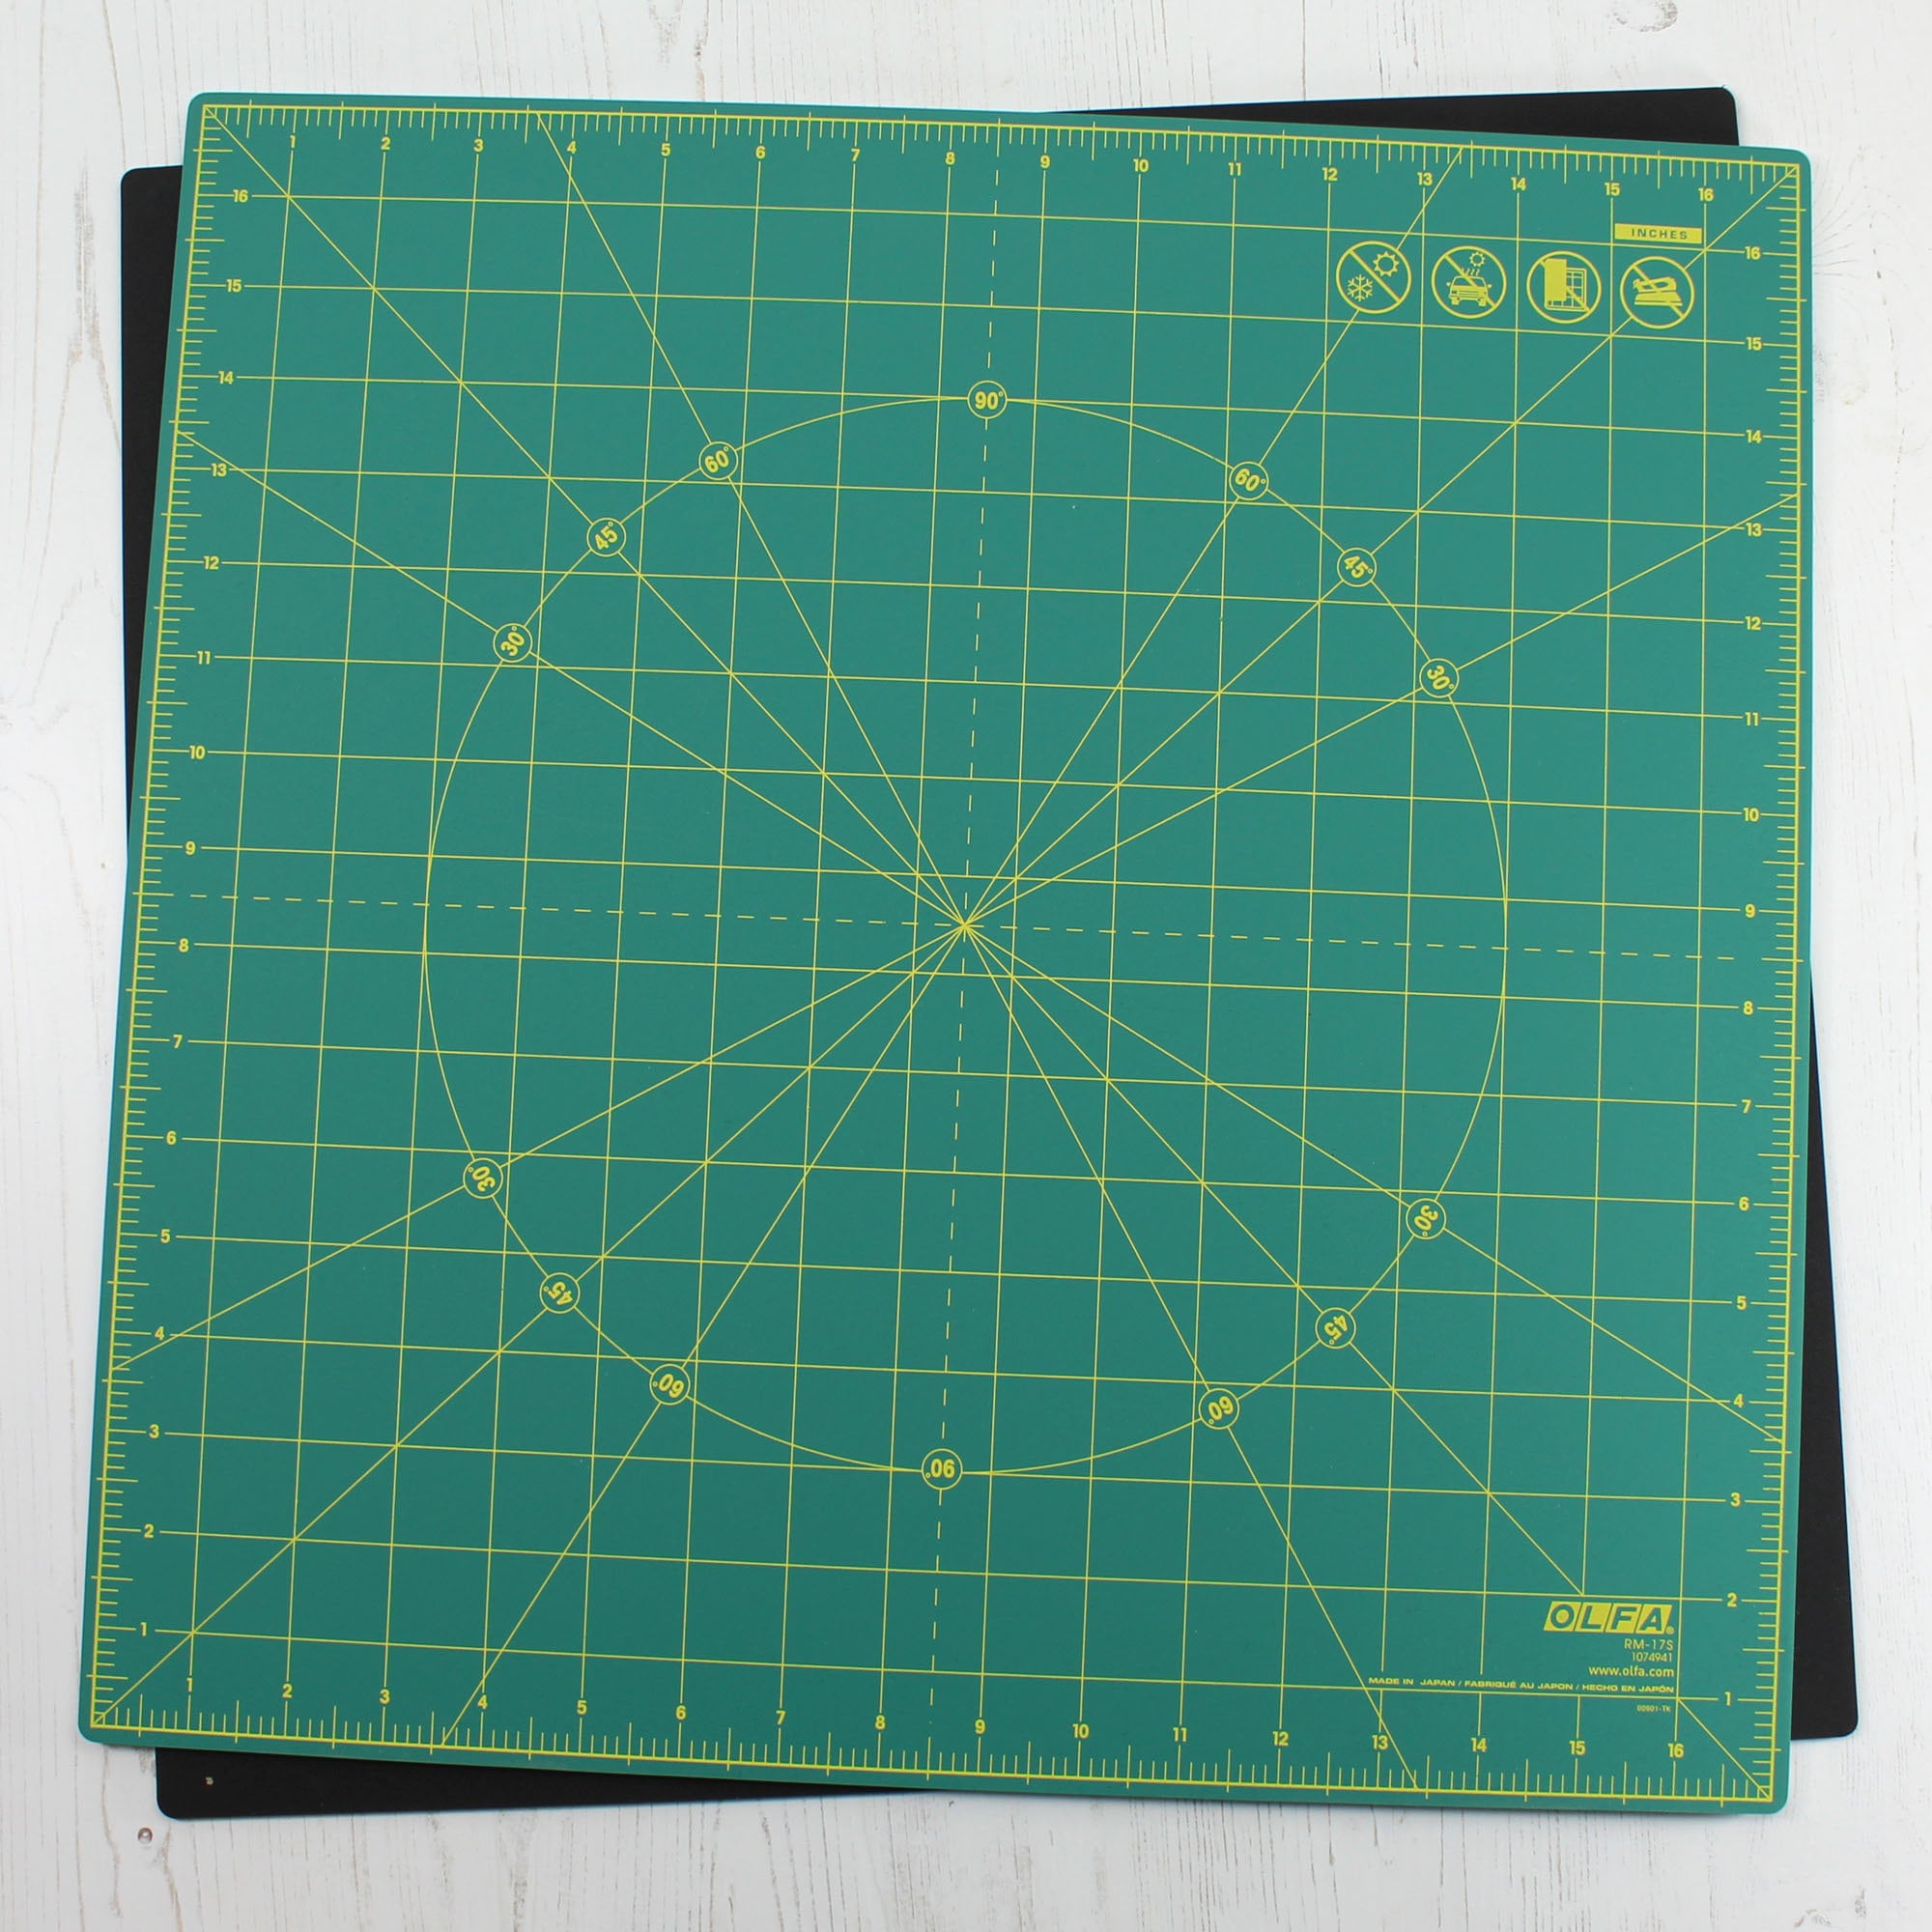 A4 A5 Cutting Mat,pvc Double Side Cutting Mat,leather Craft